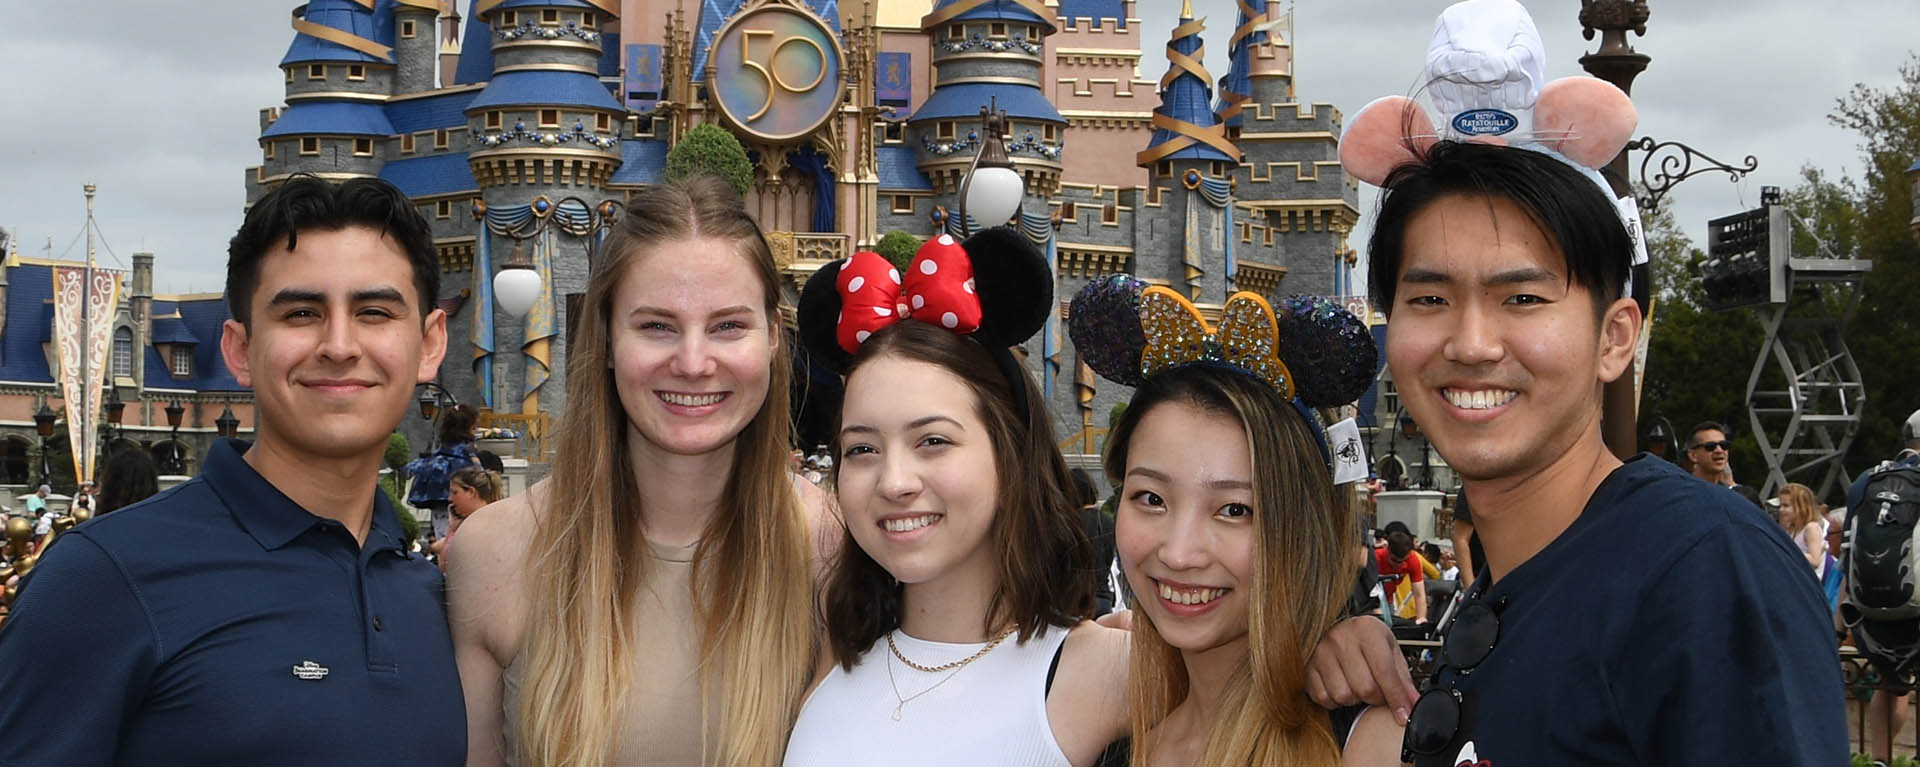 Students smile while on a Disney trip part of their WTE project.